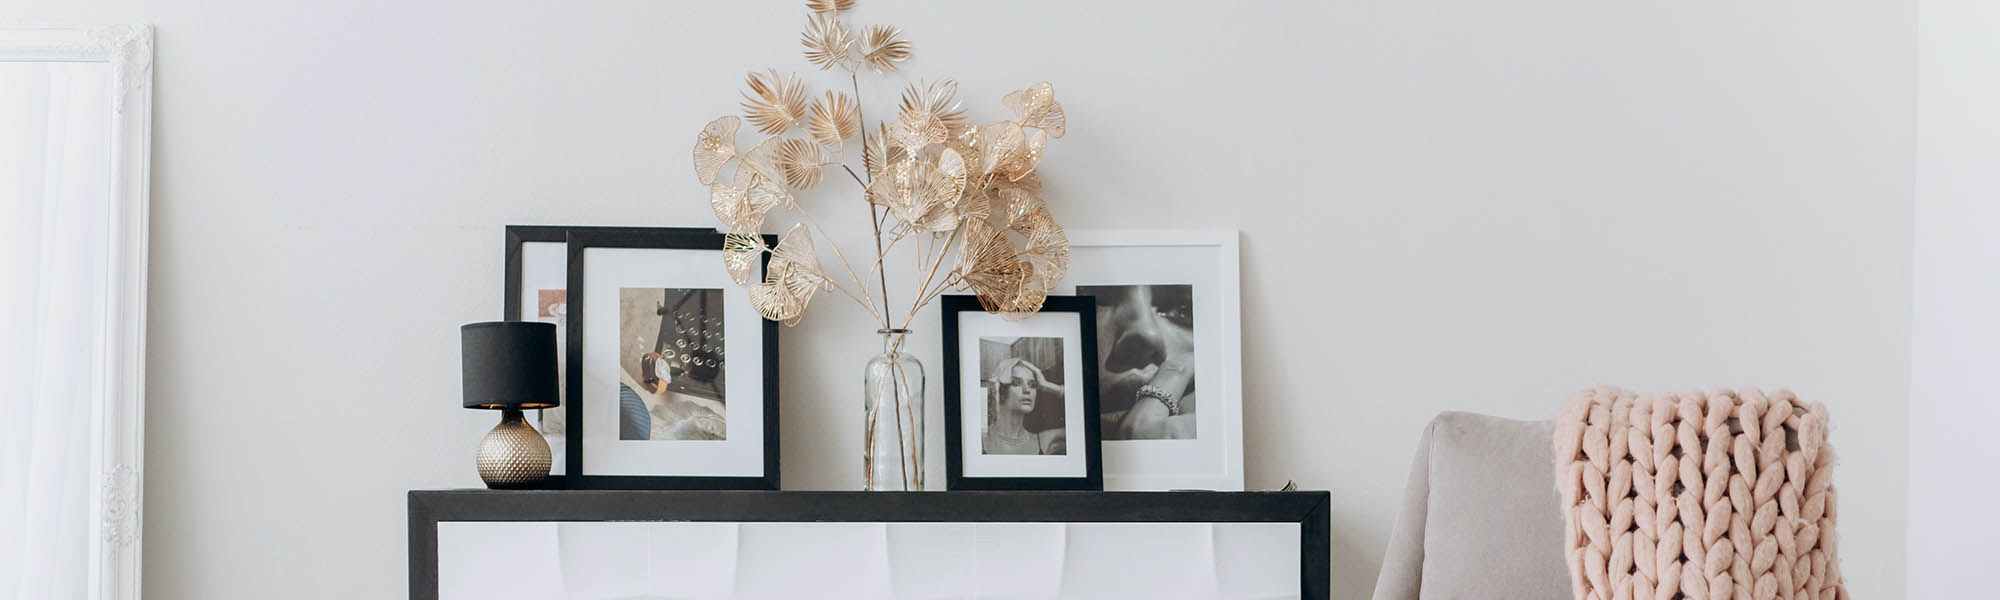 Decorations and photos in photo frames on a stylish shelf in the living room